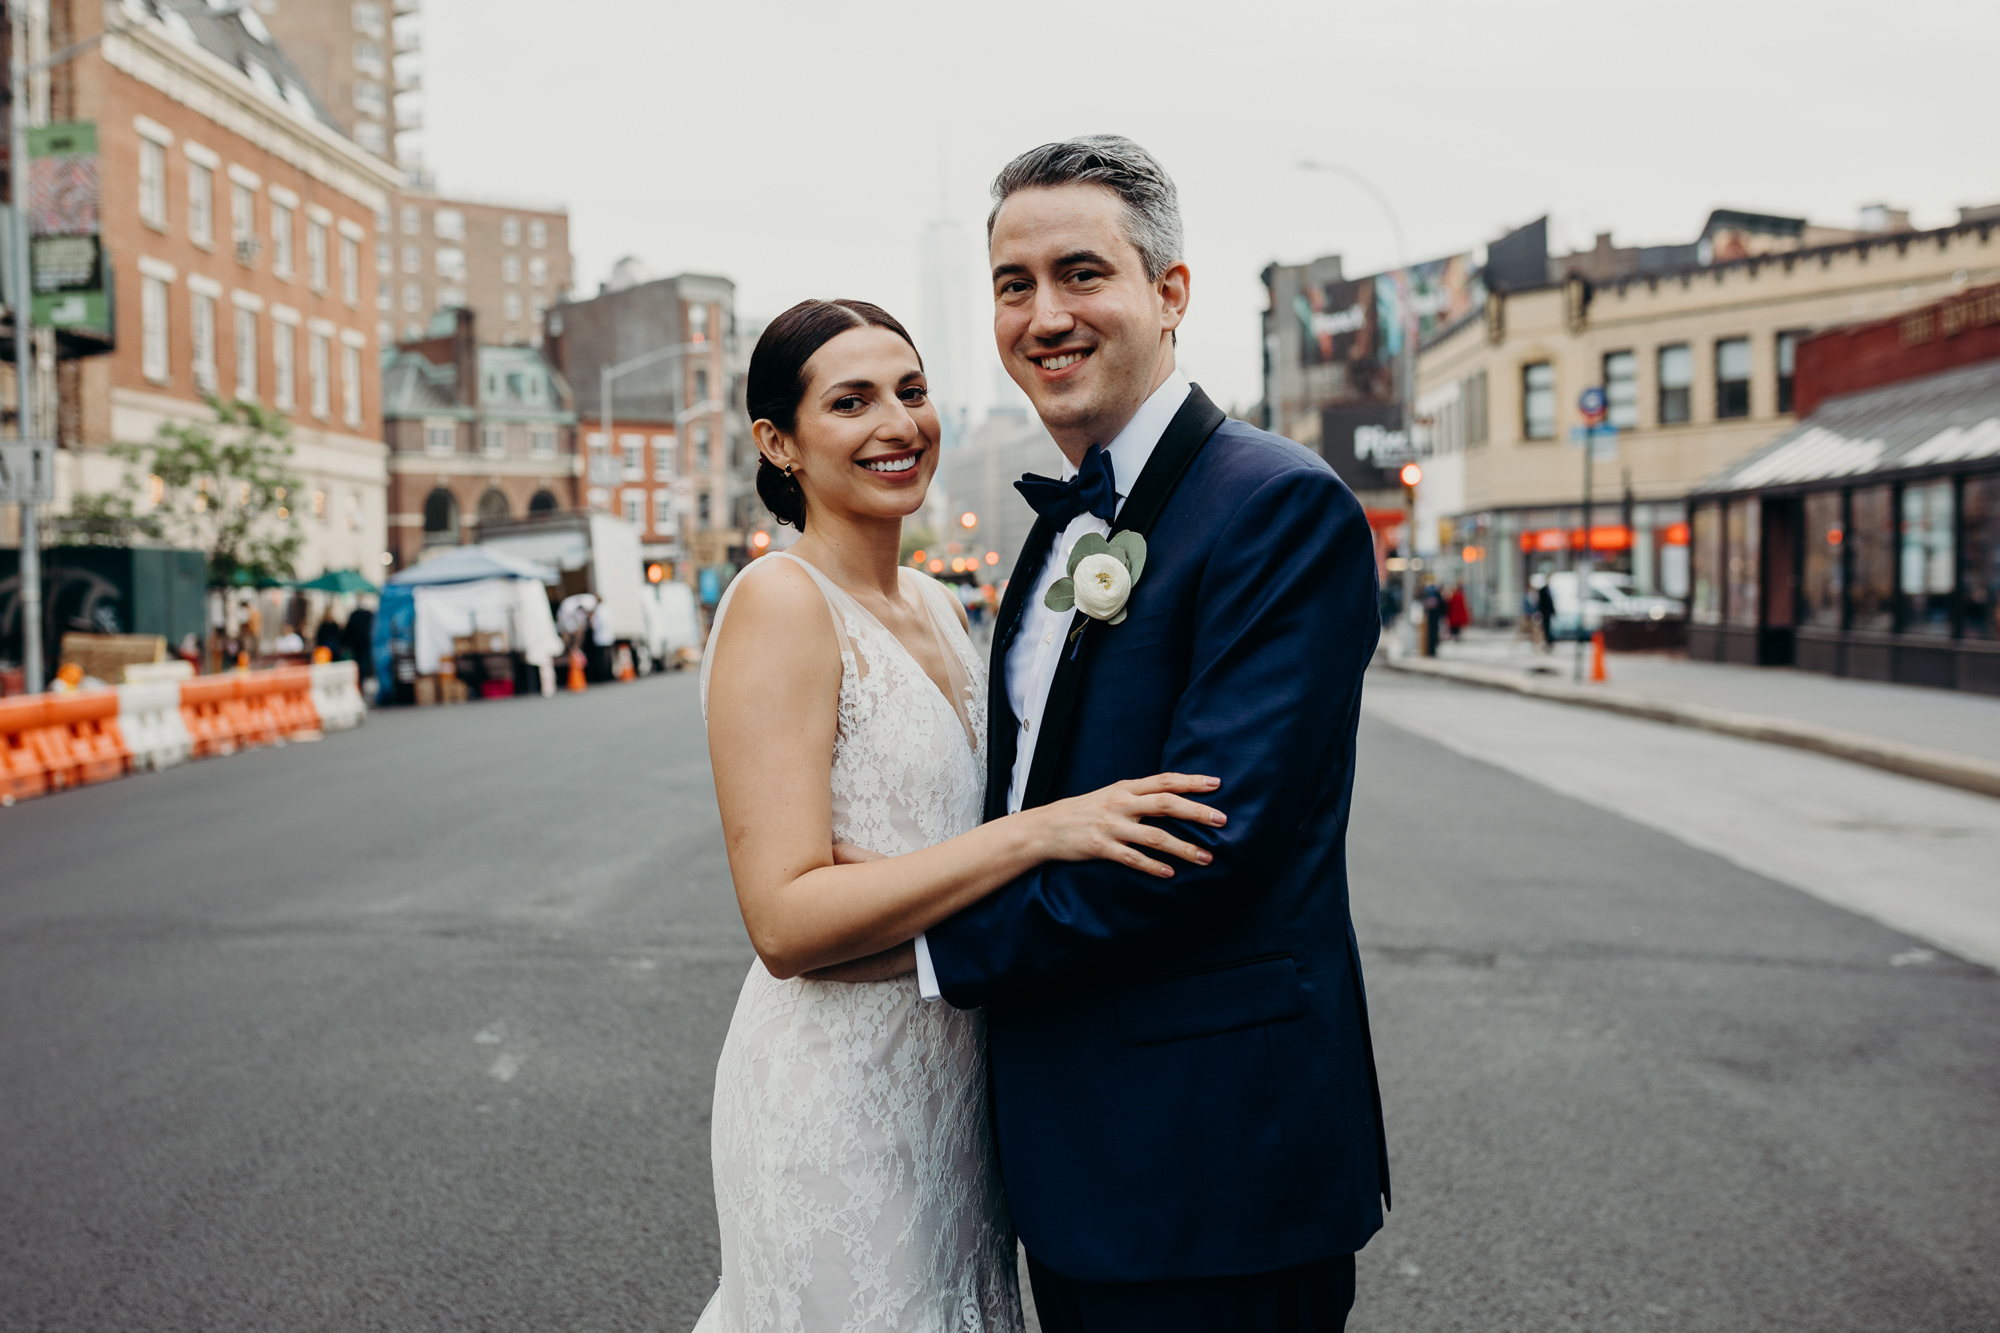 a portrait of a bride and groom in the west village, new york city